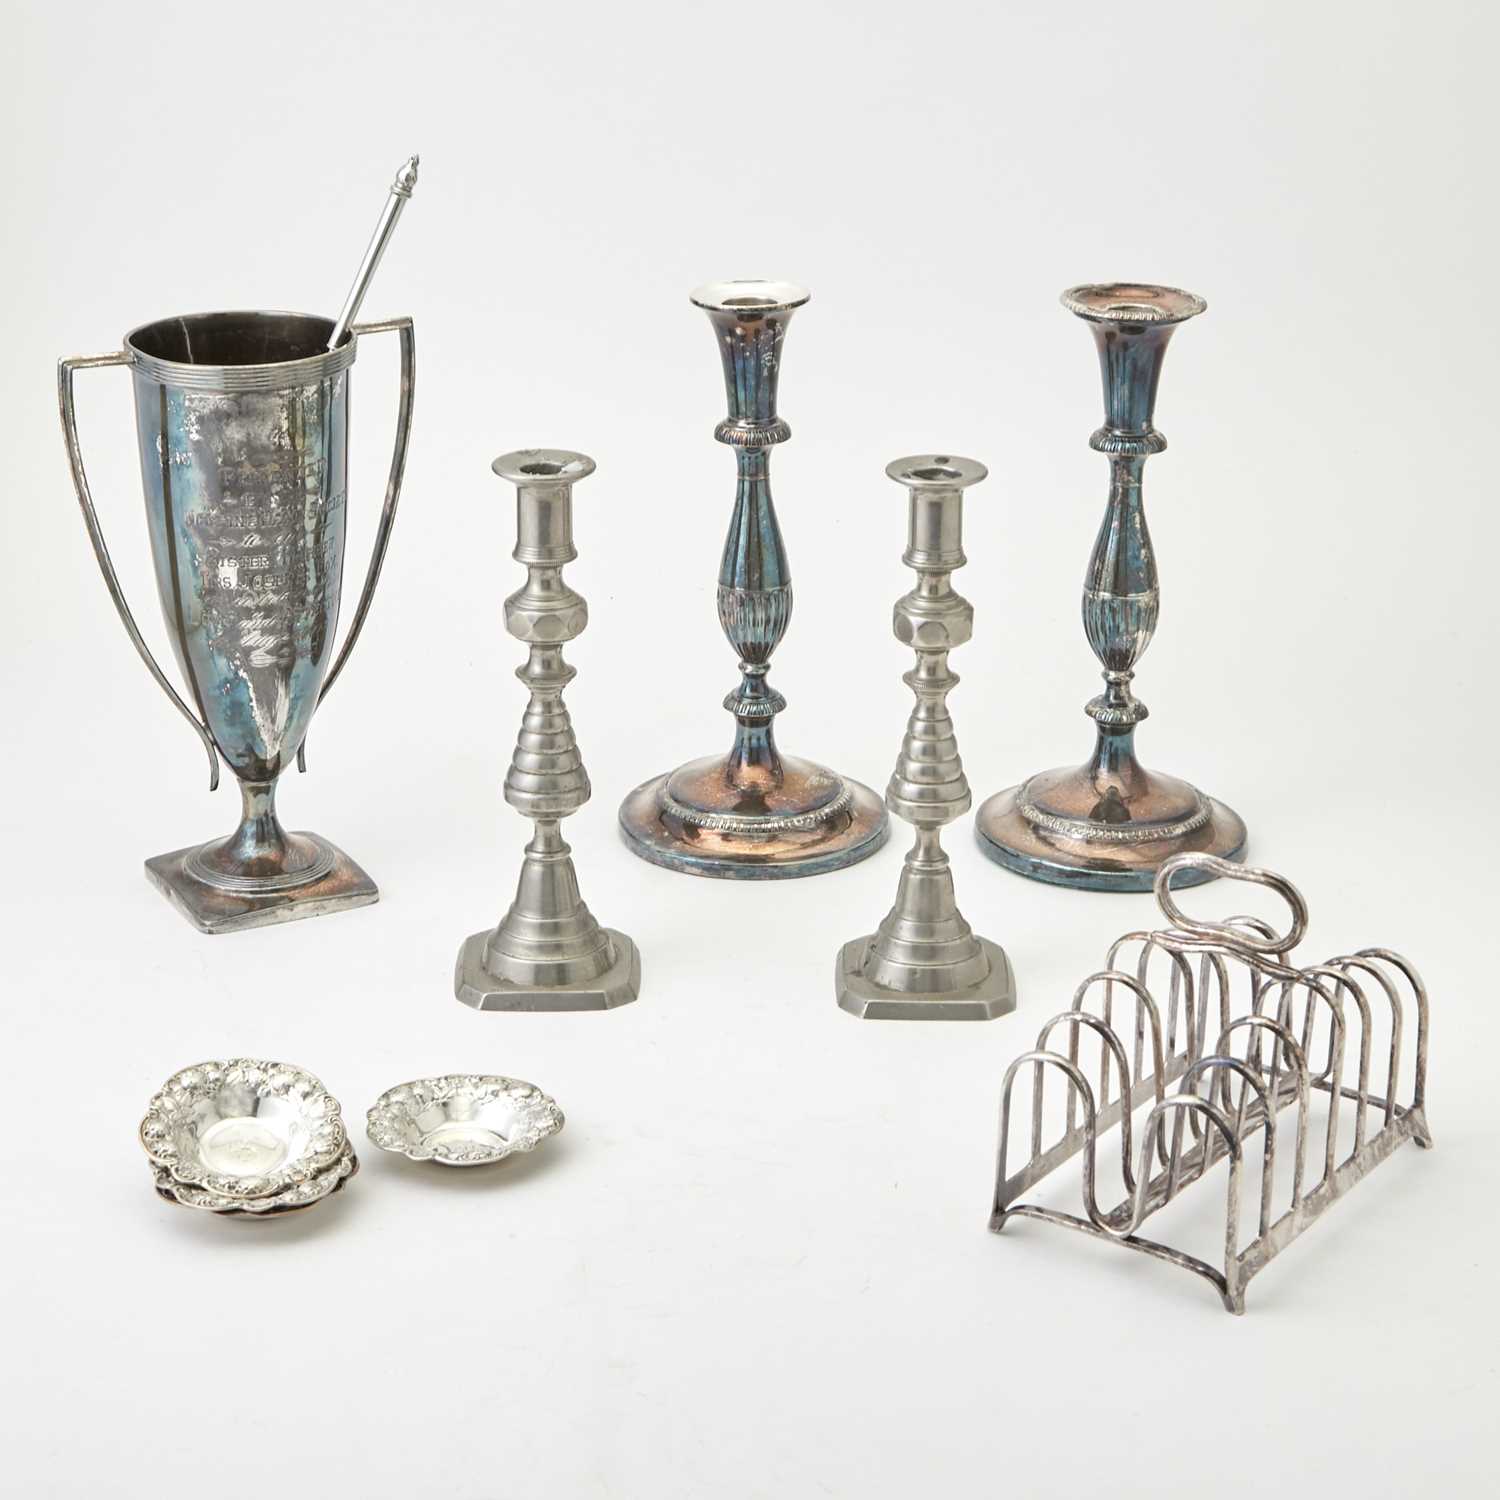 Lot 206 - Group of Sterling Silver, Silver-Plate, Pewter Table Articles